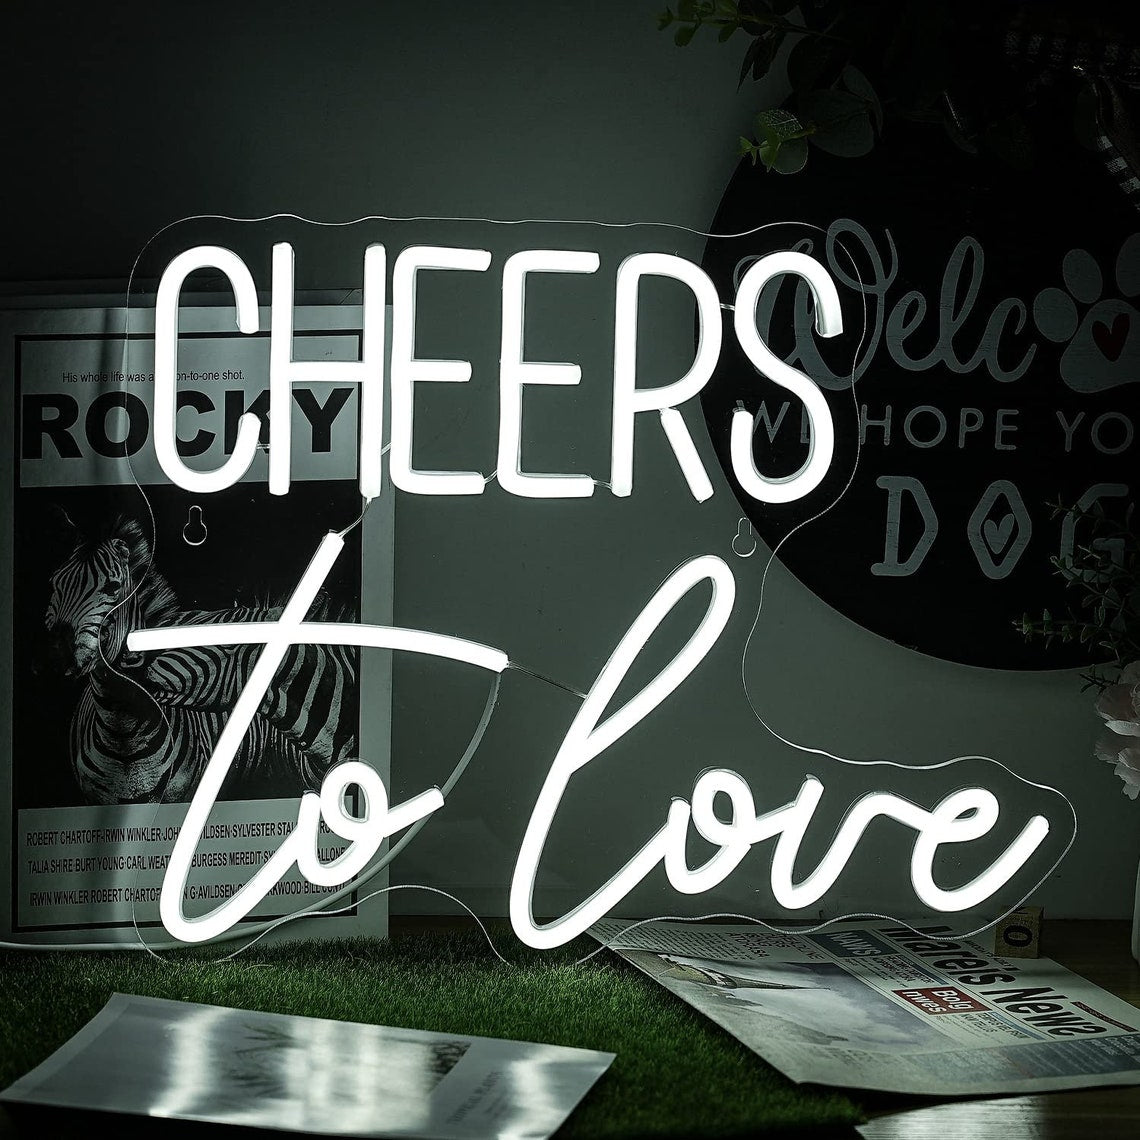 Cheers to Love Neon Sign